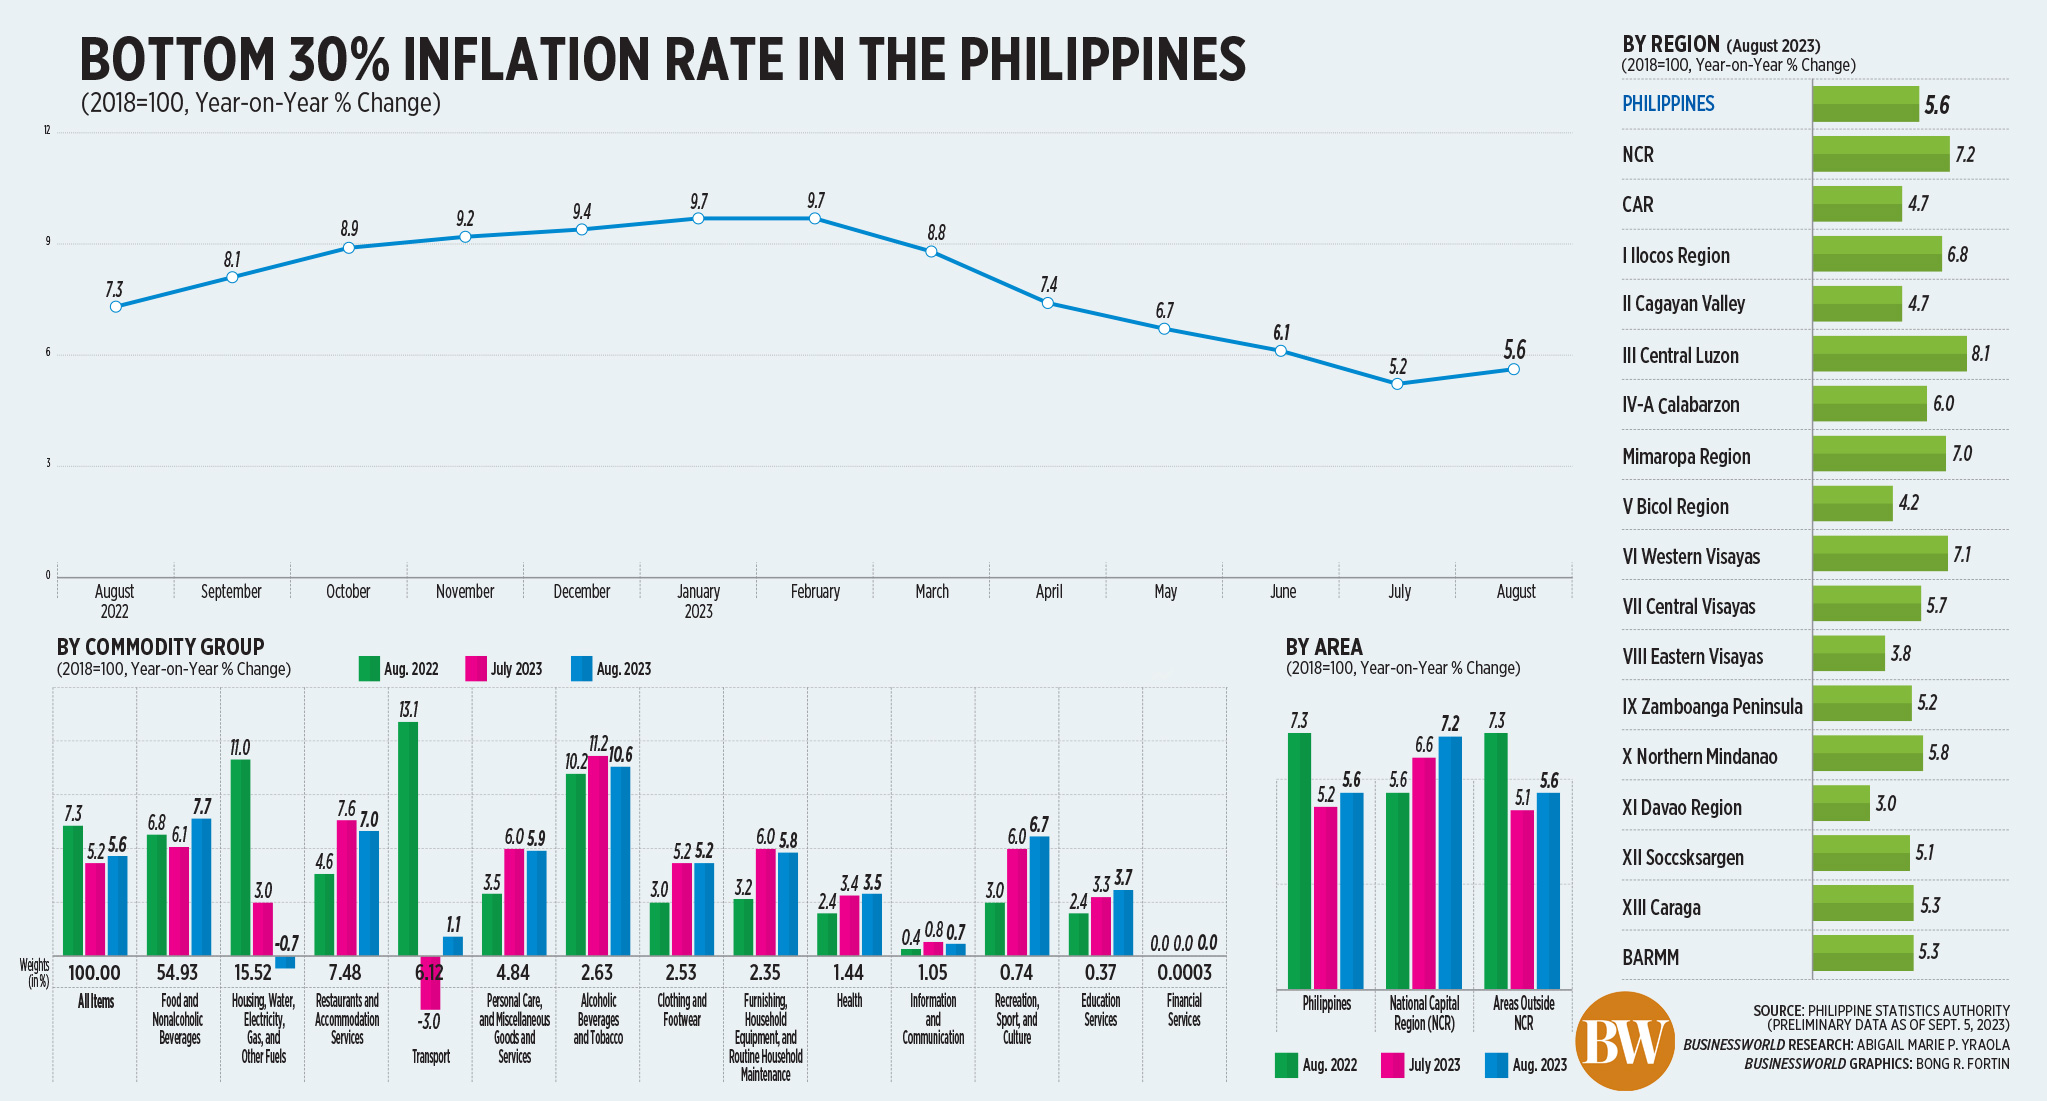 Bottom 30% inflation rate in the Philippines